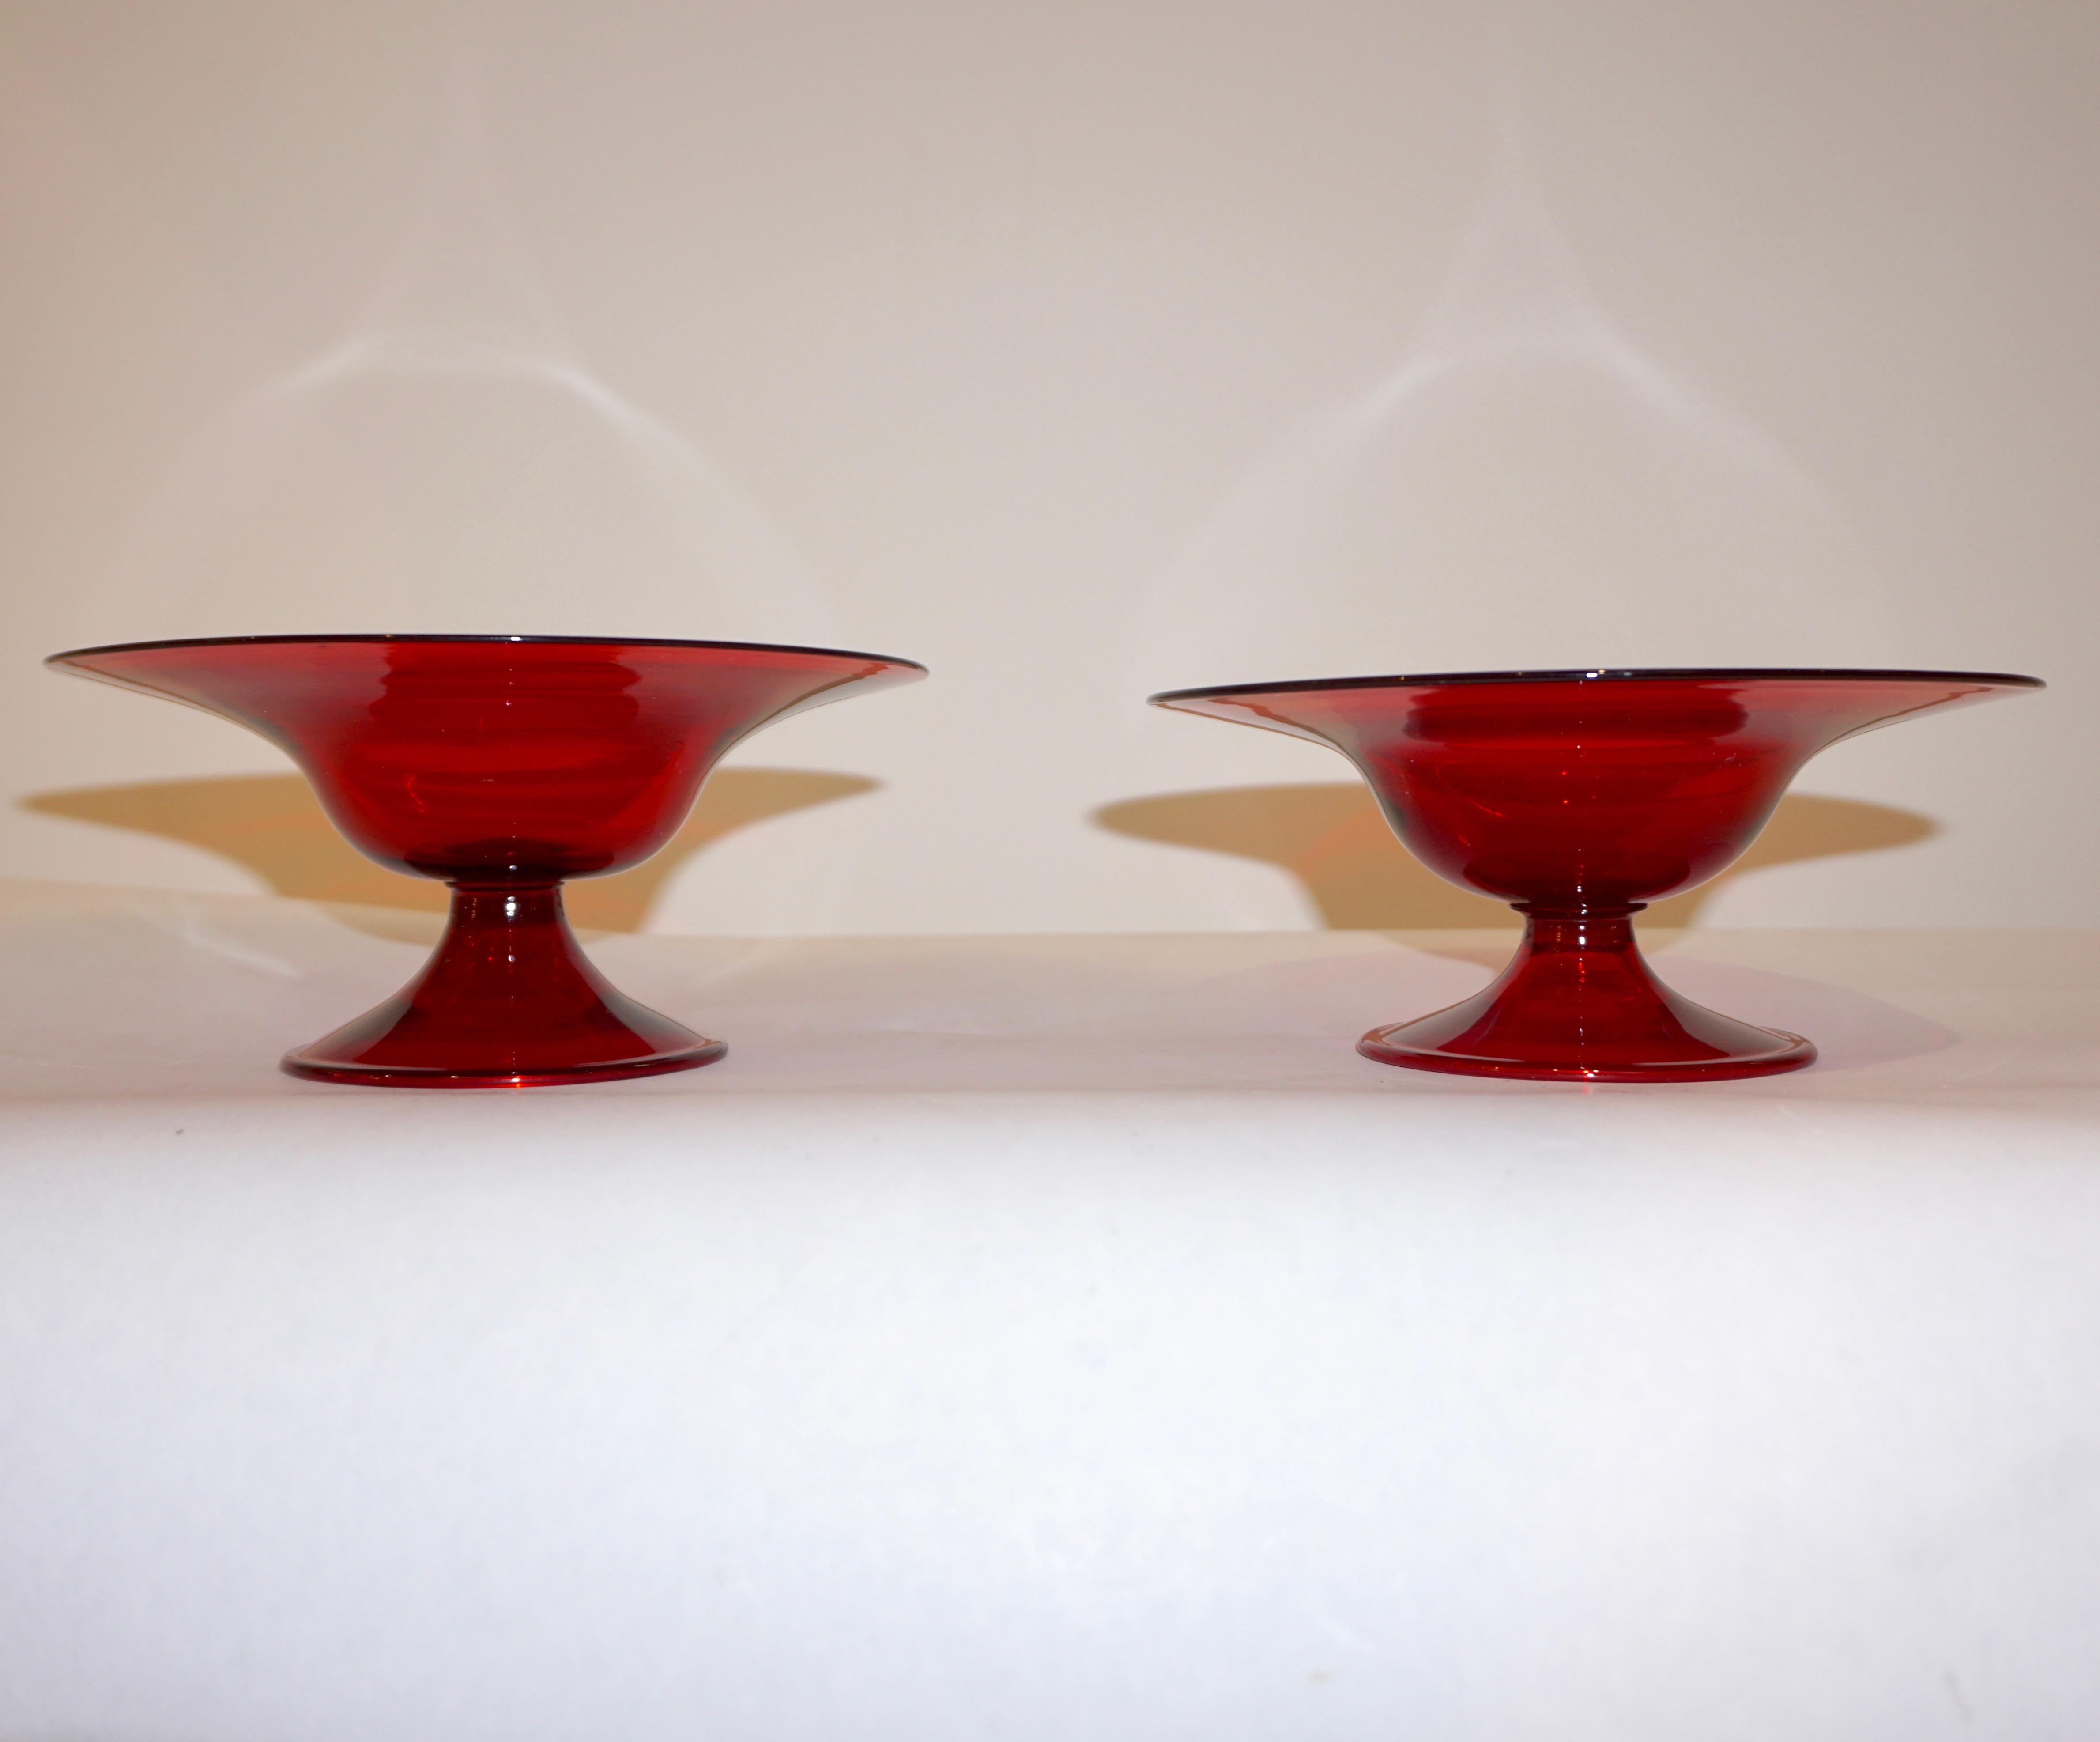 Exquisite Venetian pair of Murano glass tazza dishes, in rich deep crimson red, highest quality of execution: delicately blown with rims and raised on footed base. With engraved signature.
Diameter of base: 3.3 inches.
